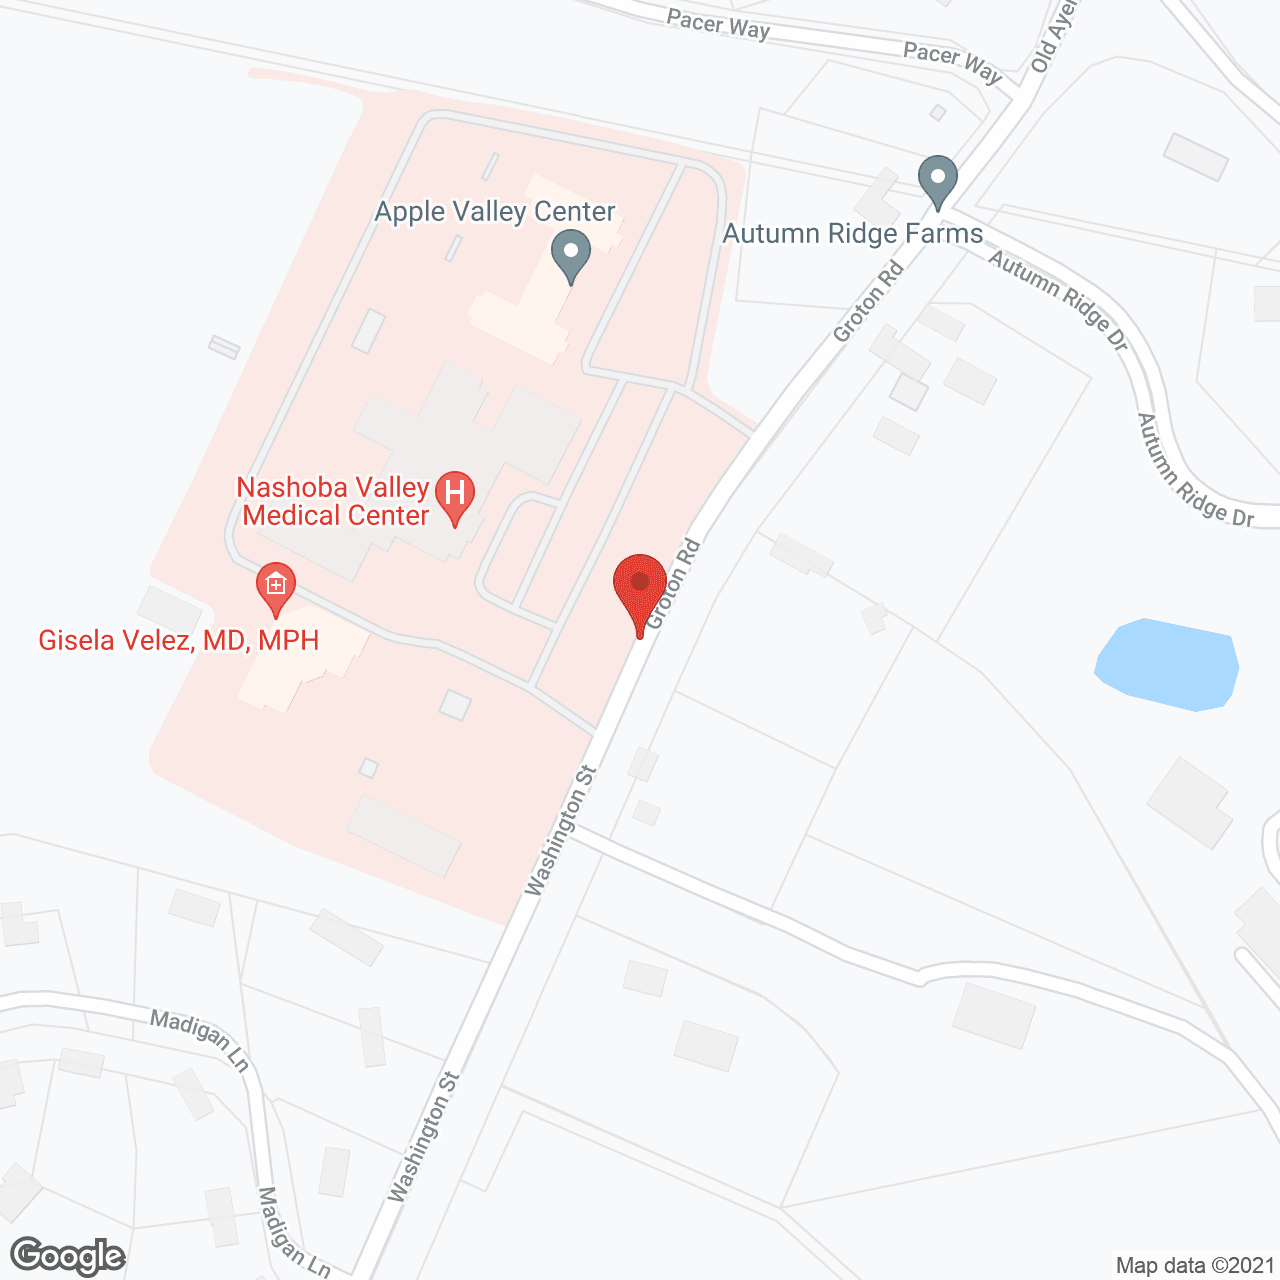 Apple Valley Center in google map